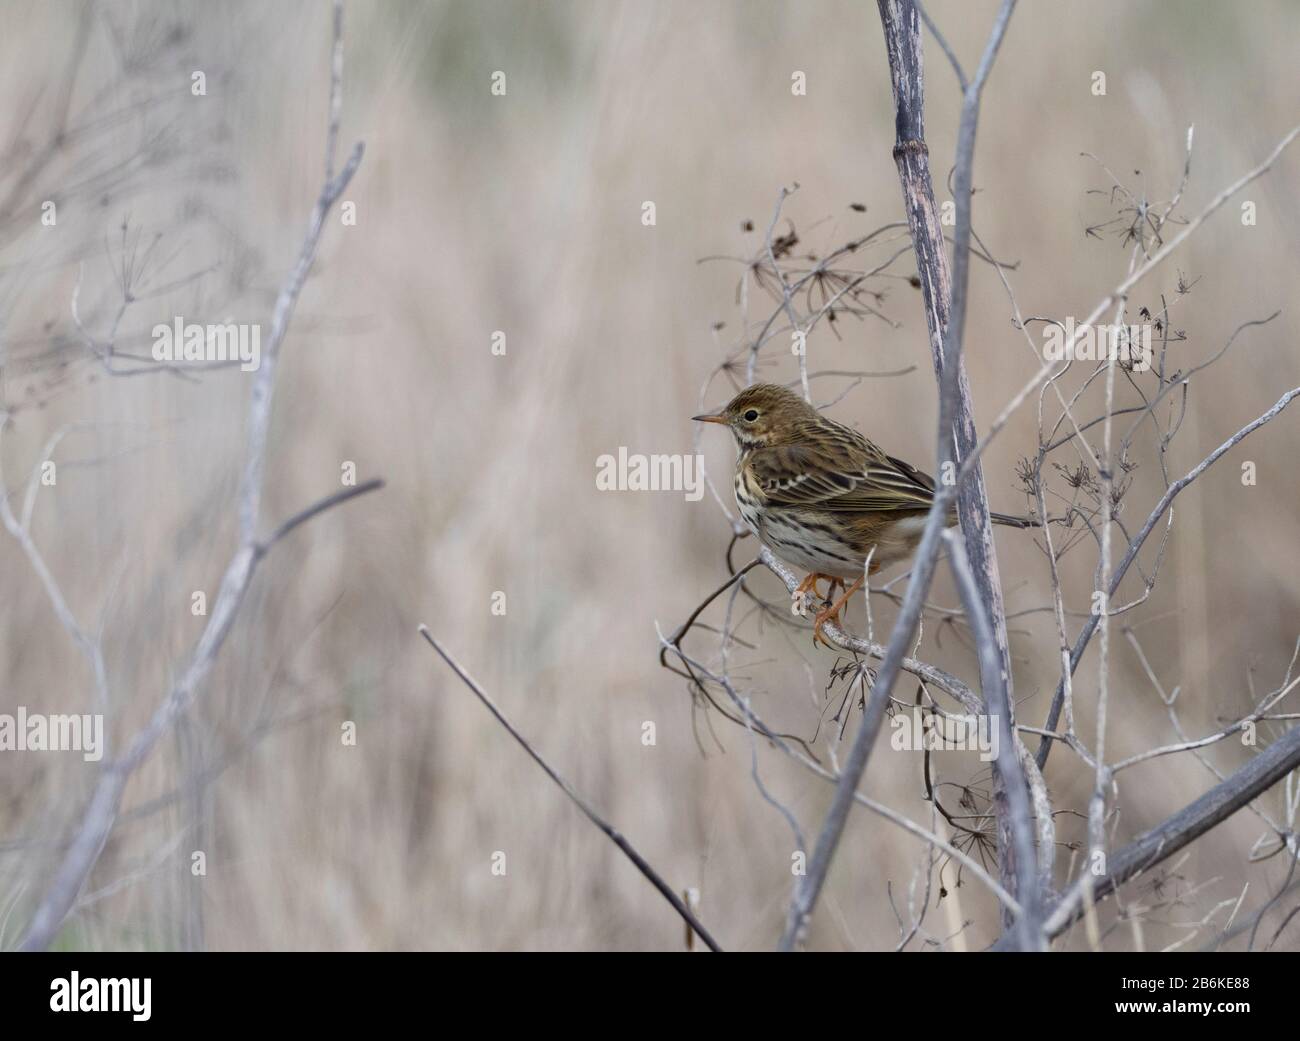 Meadow Pipit, Anthus pratensis, in Strauch, Elmley Nature Reserve, Kent UK Stockfoto